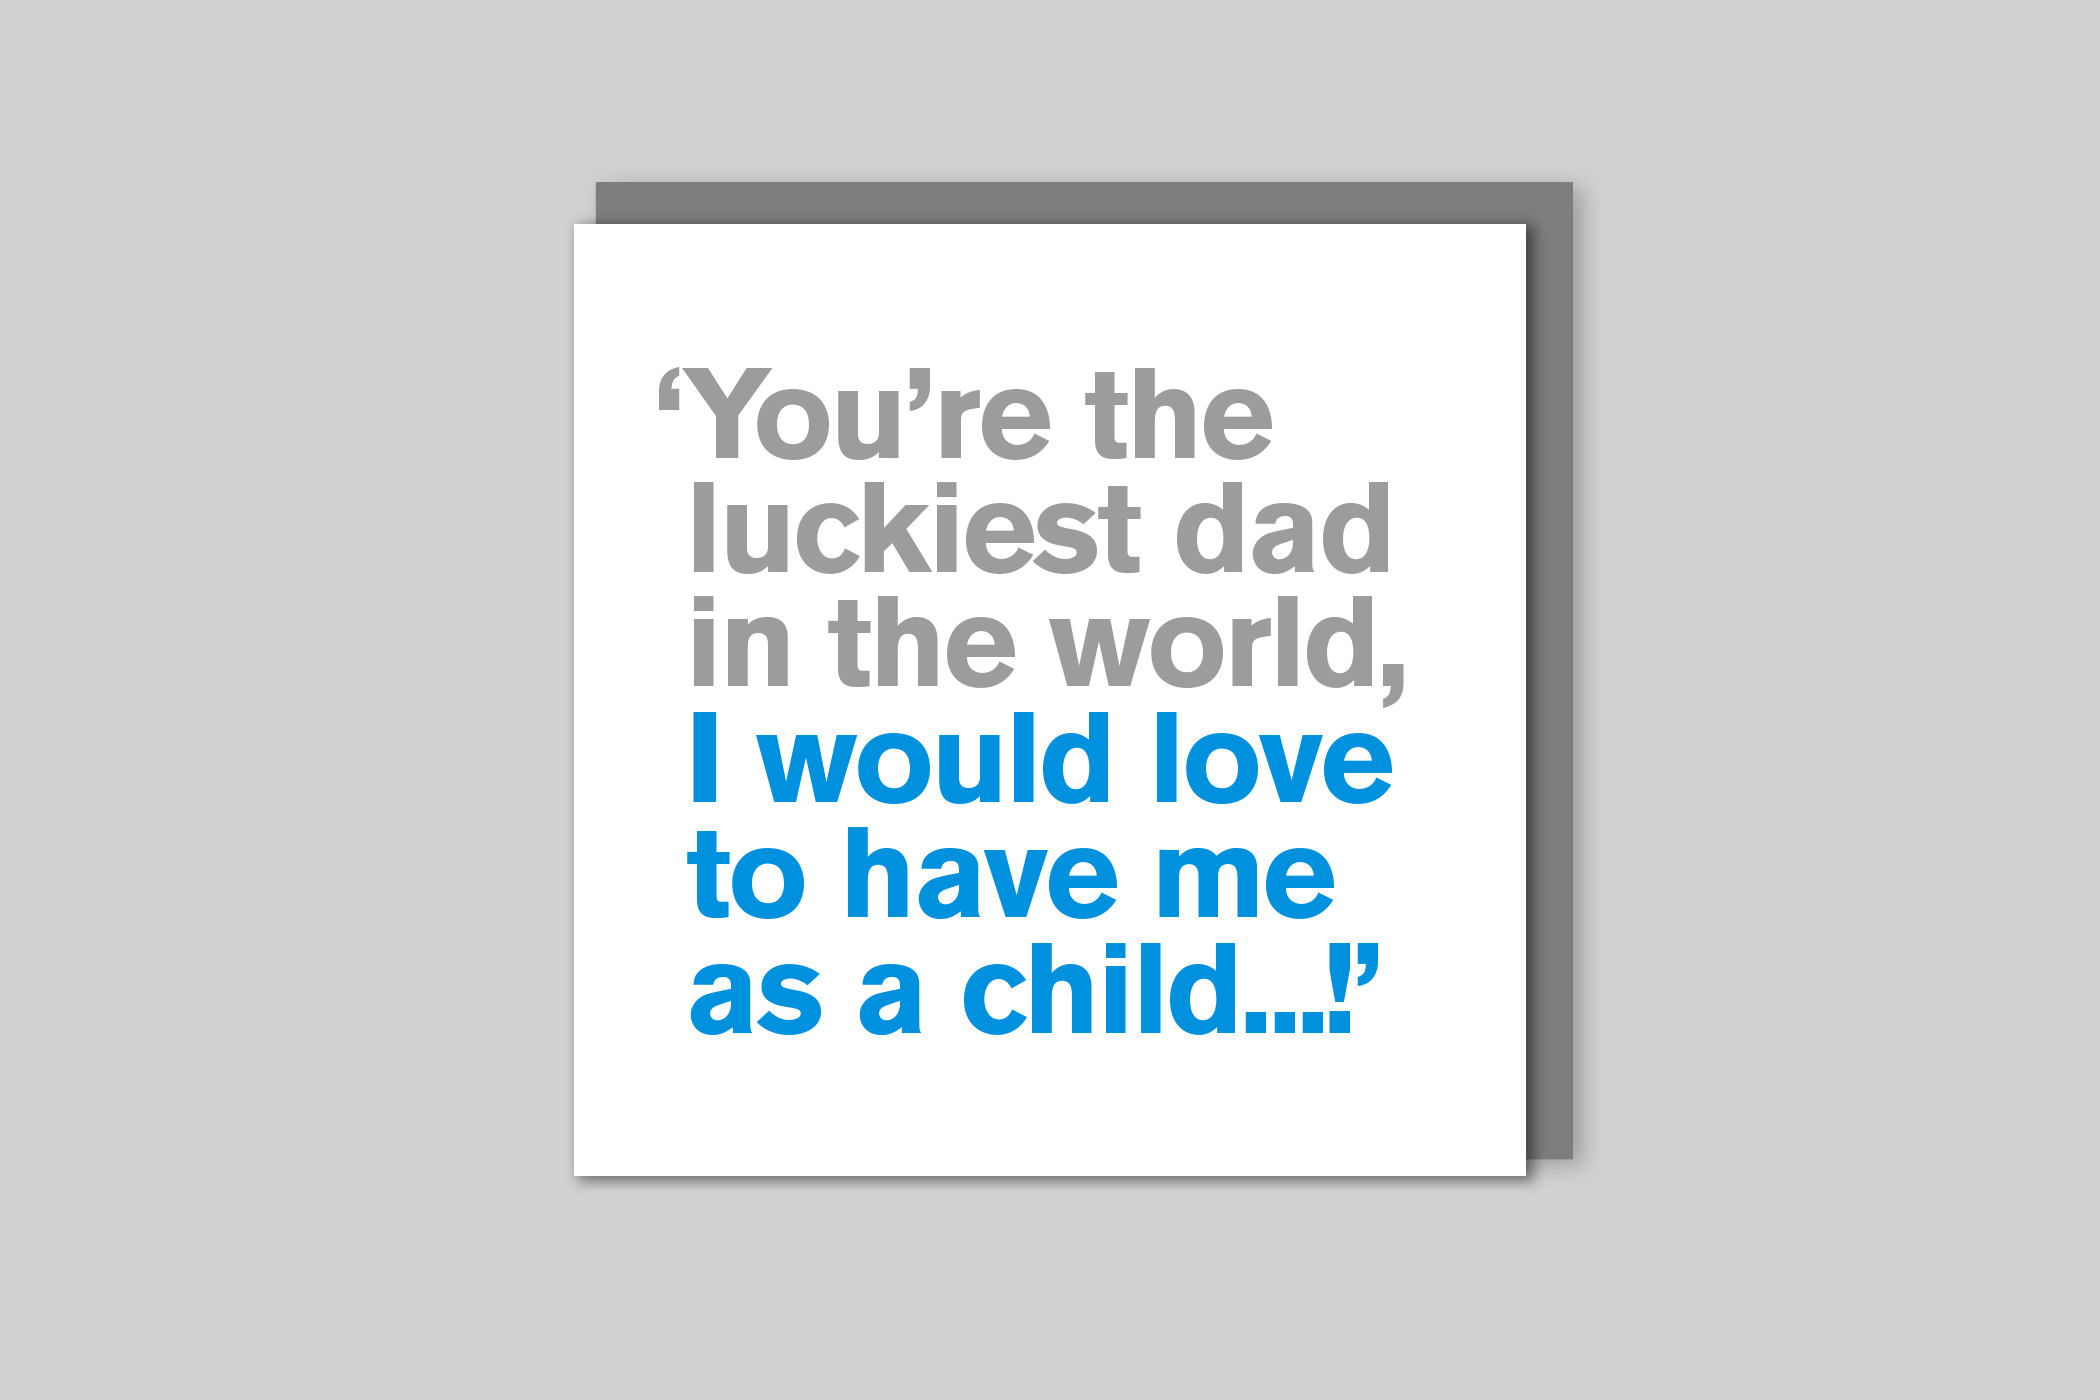 Luckiest Dad dad card from Lyric range of quotation cards by Icon, back page.